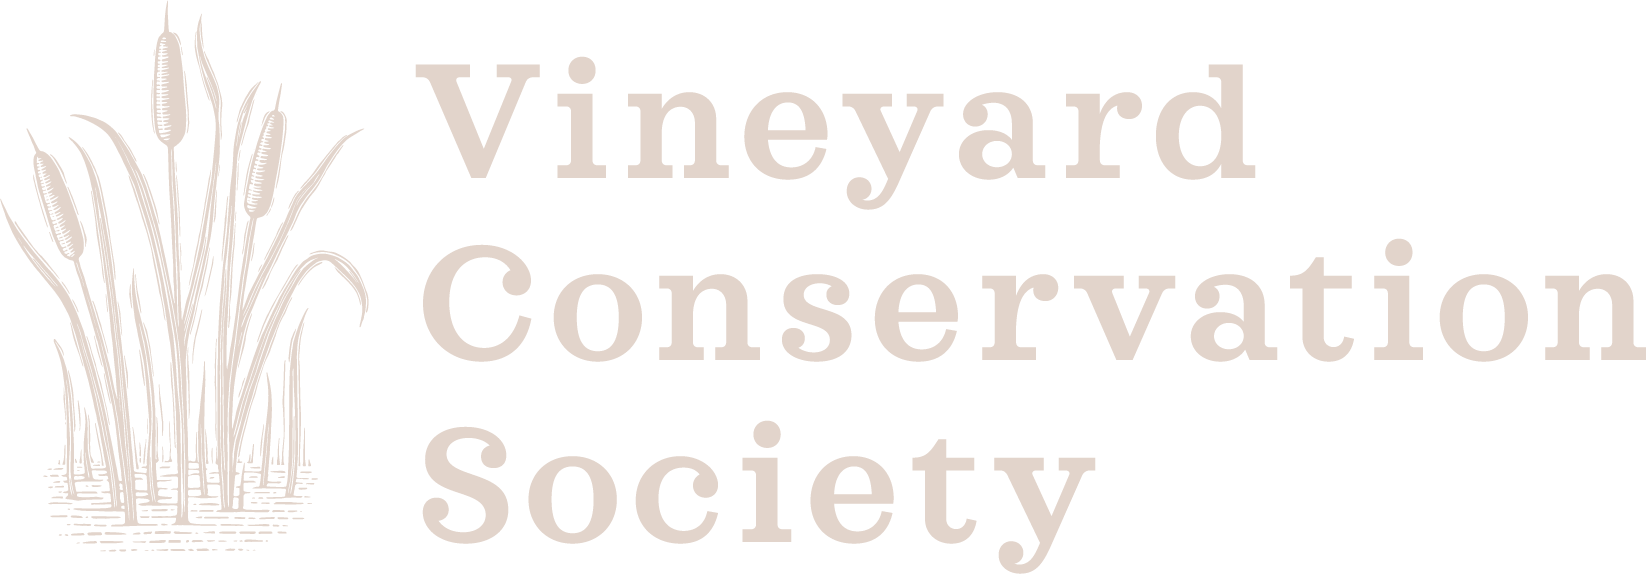 Resources for your event – Vineyard Preservation Trust